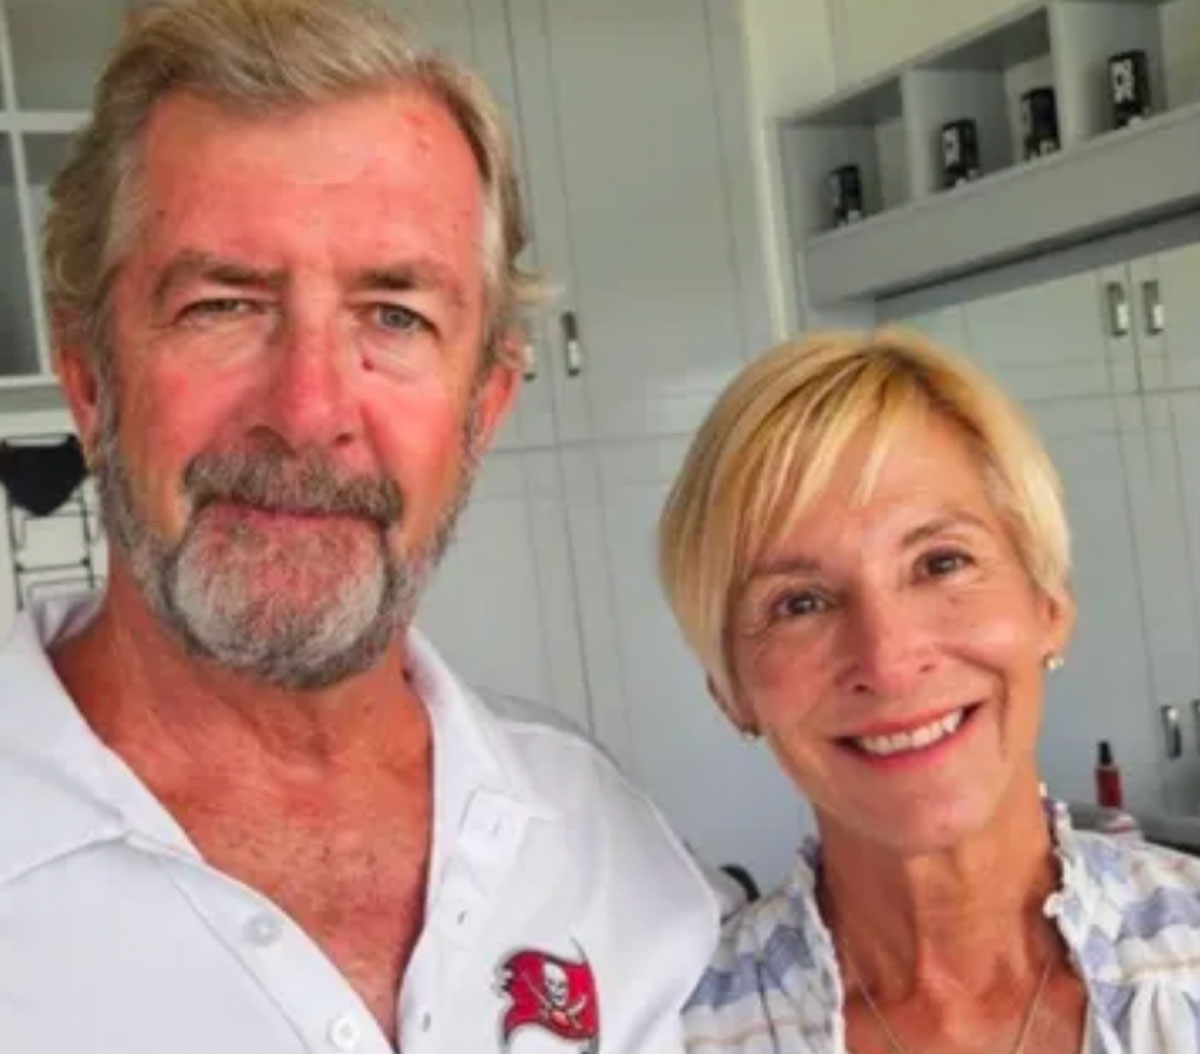 American Sailing Couple Missing In Caribbean – After Police Think Three Escaped Prisoners Violently Hijacked Boat!